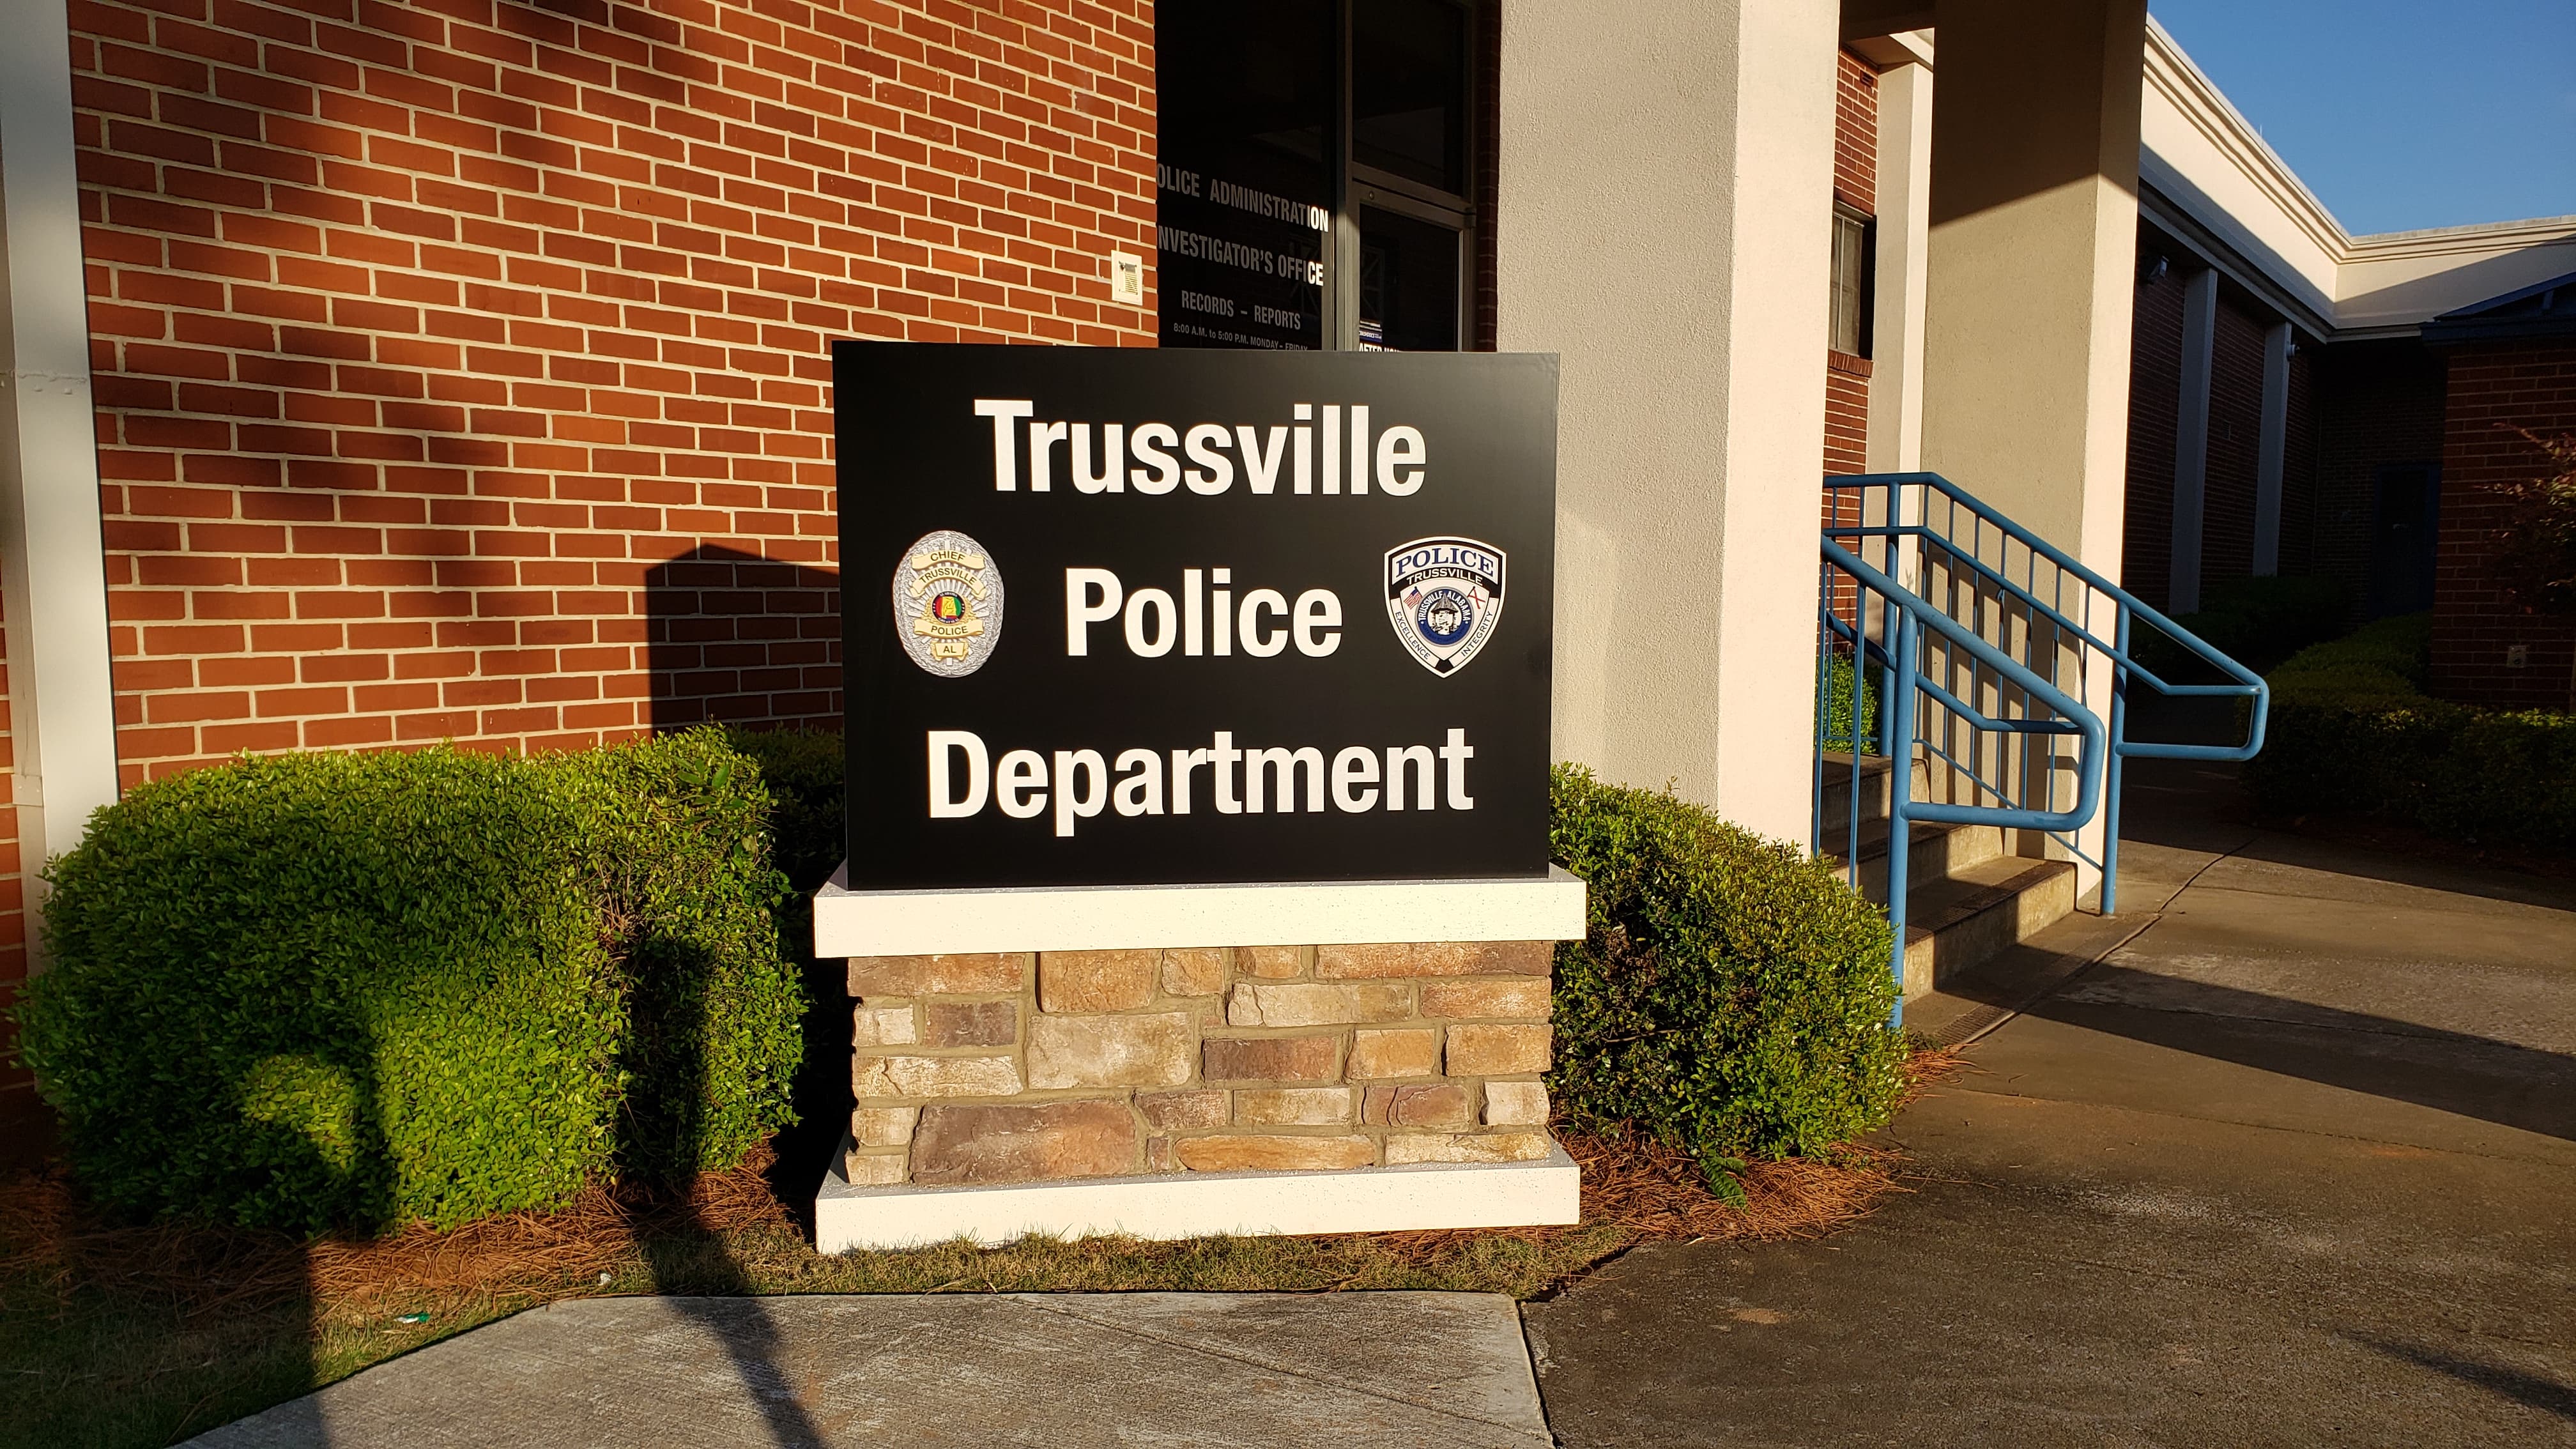 Trussville PD working to stop spread of coronavirus in community following orders from health department